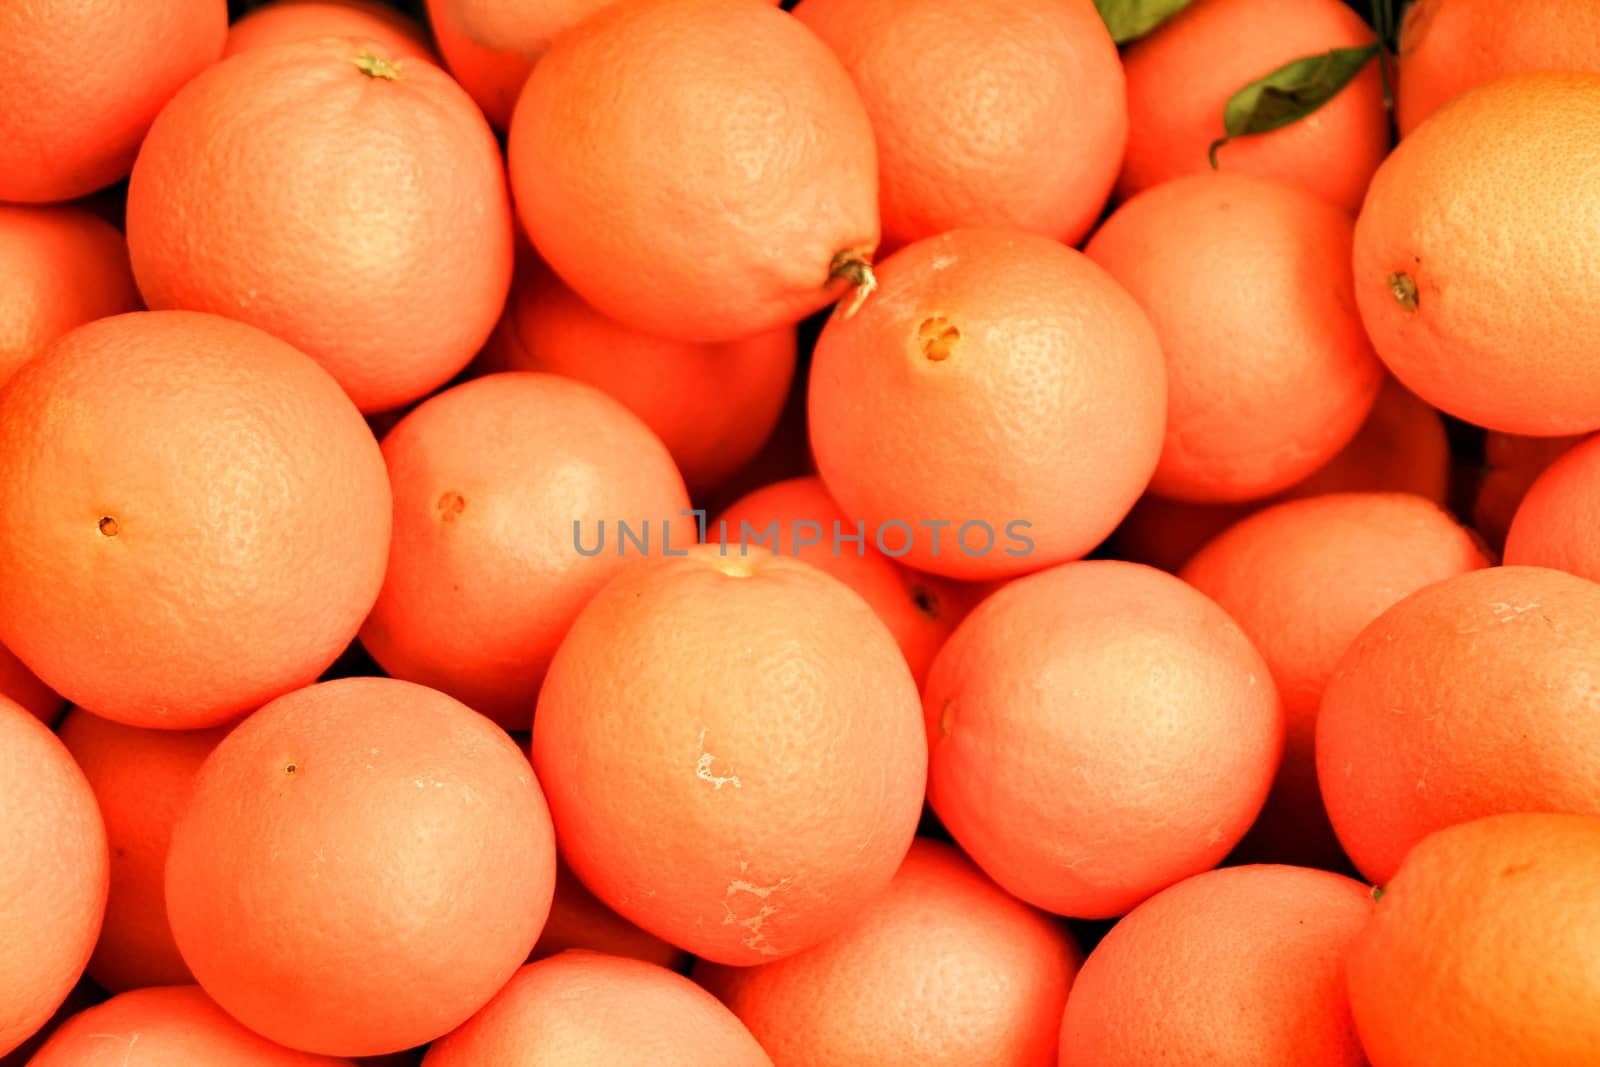 Oranges for sale at a market stall by soniabonet